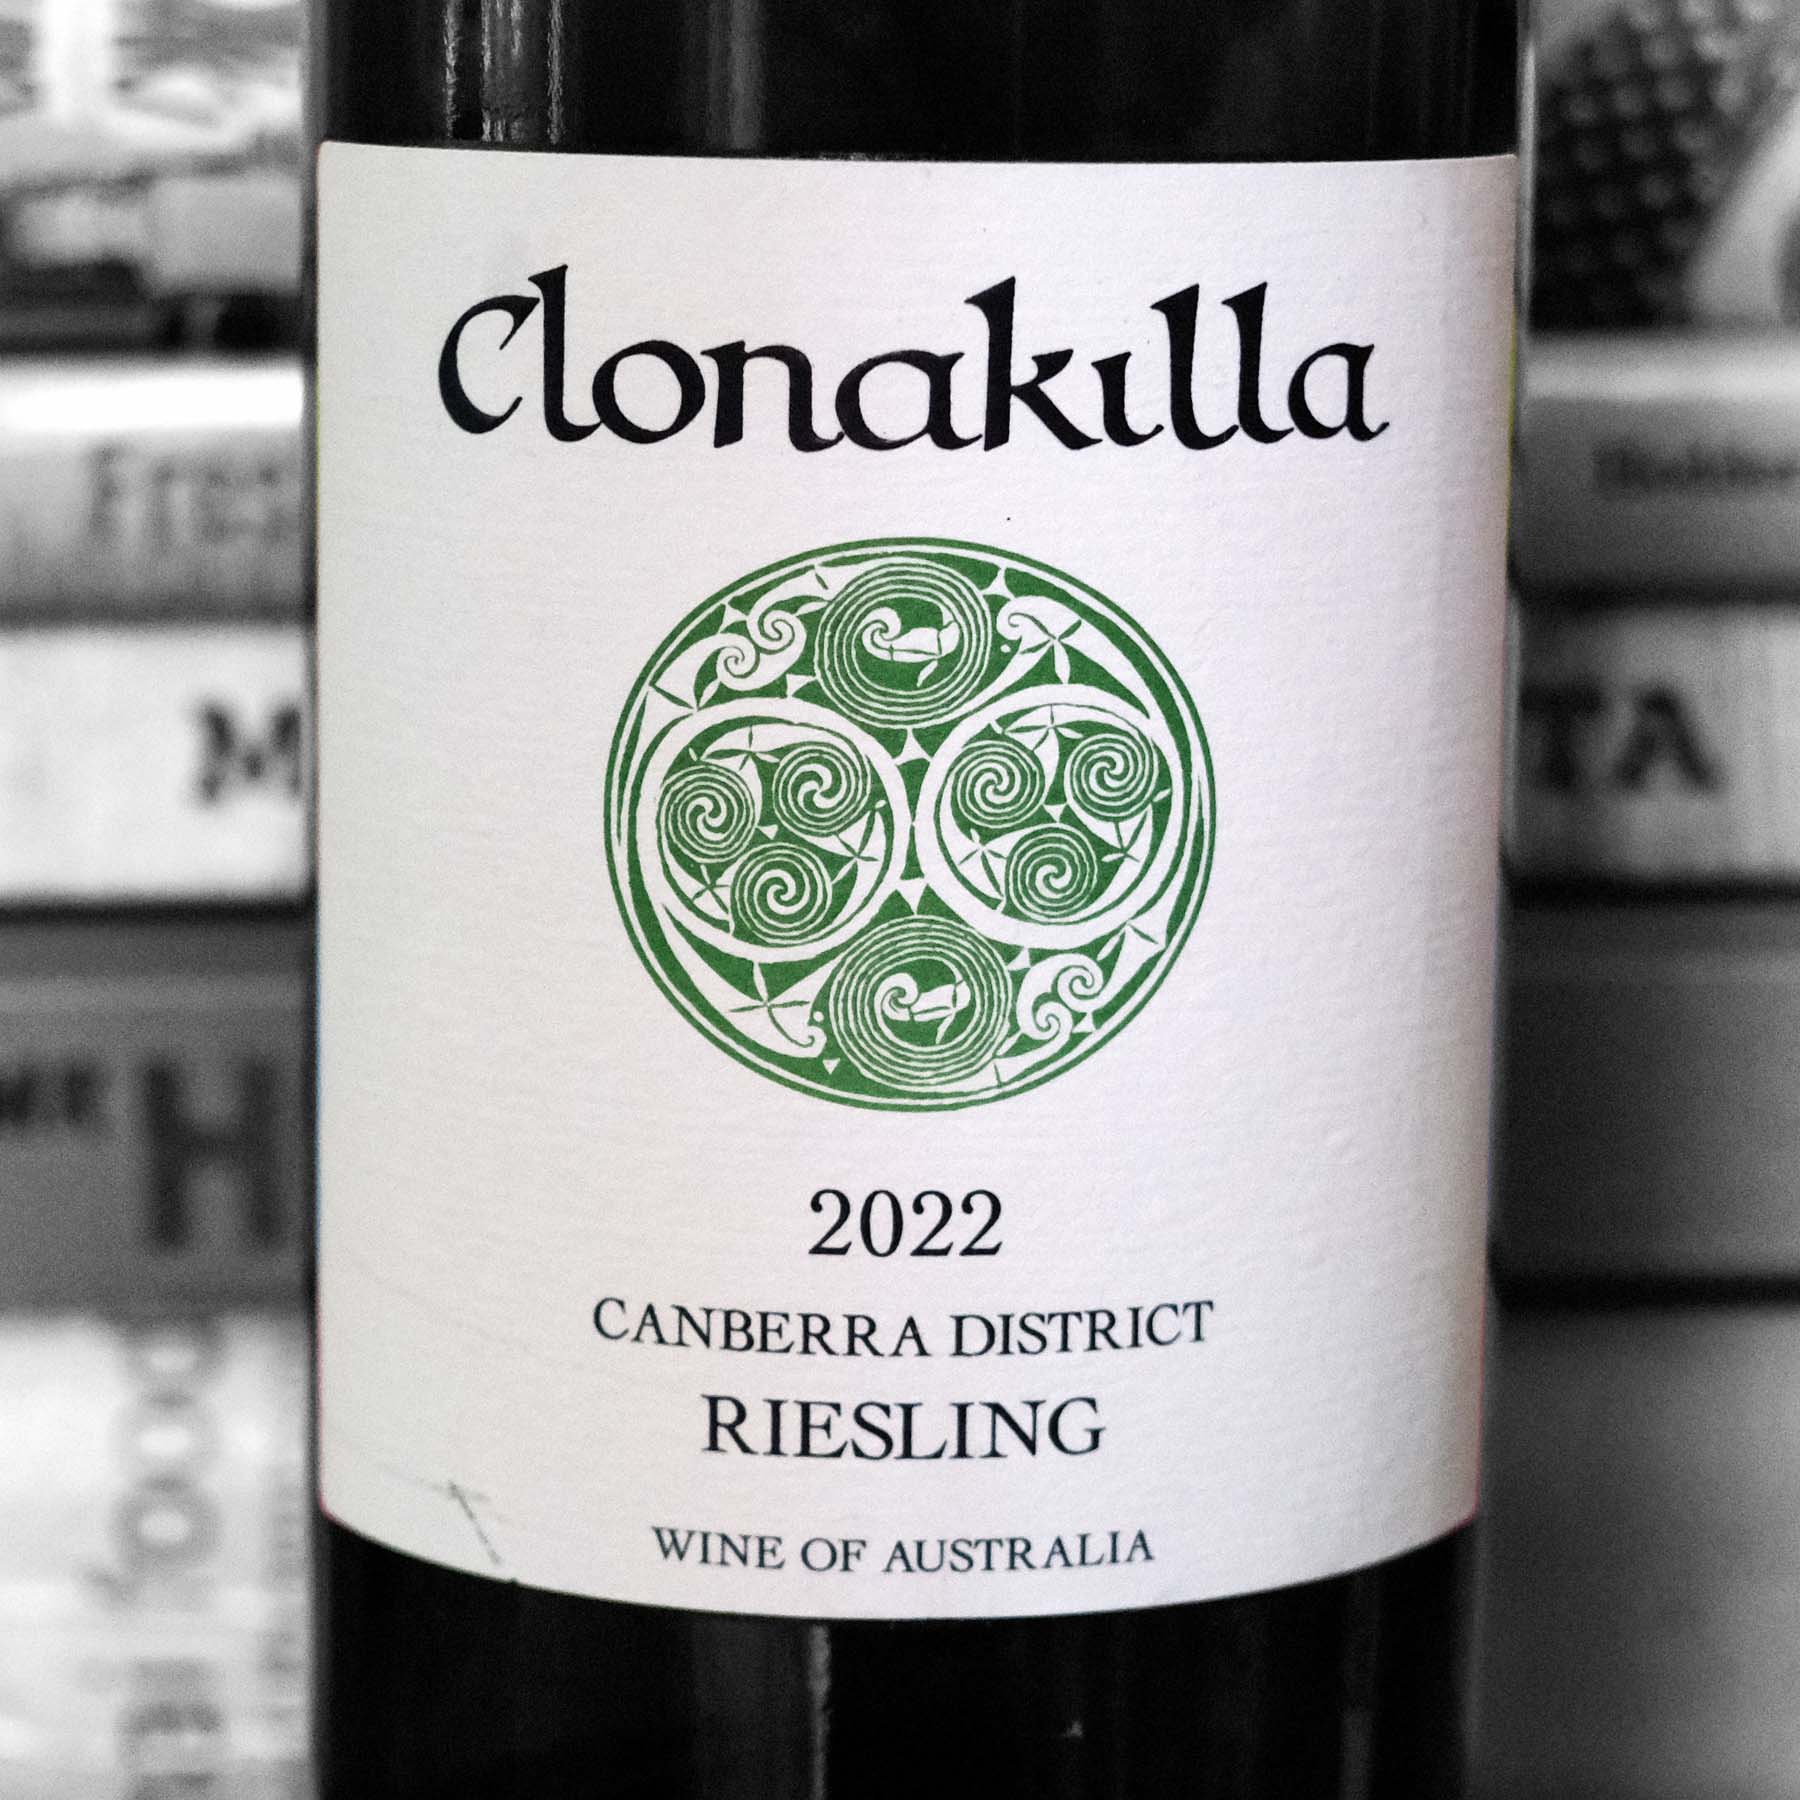 Clonakilla Riesling 2022 Canberra District, NSW